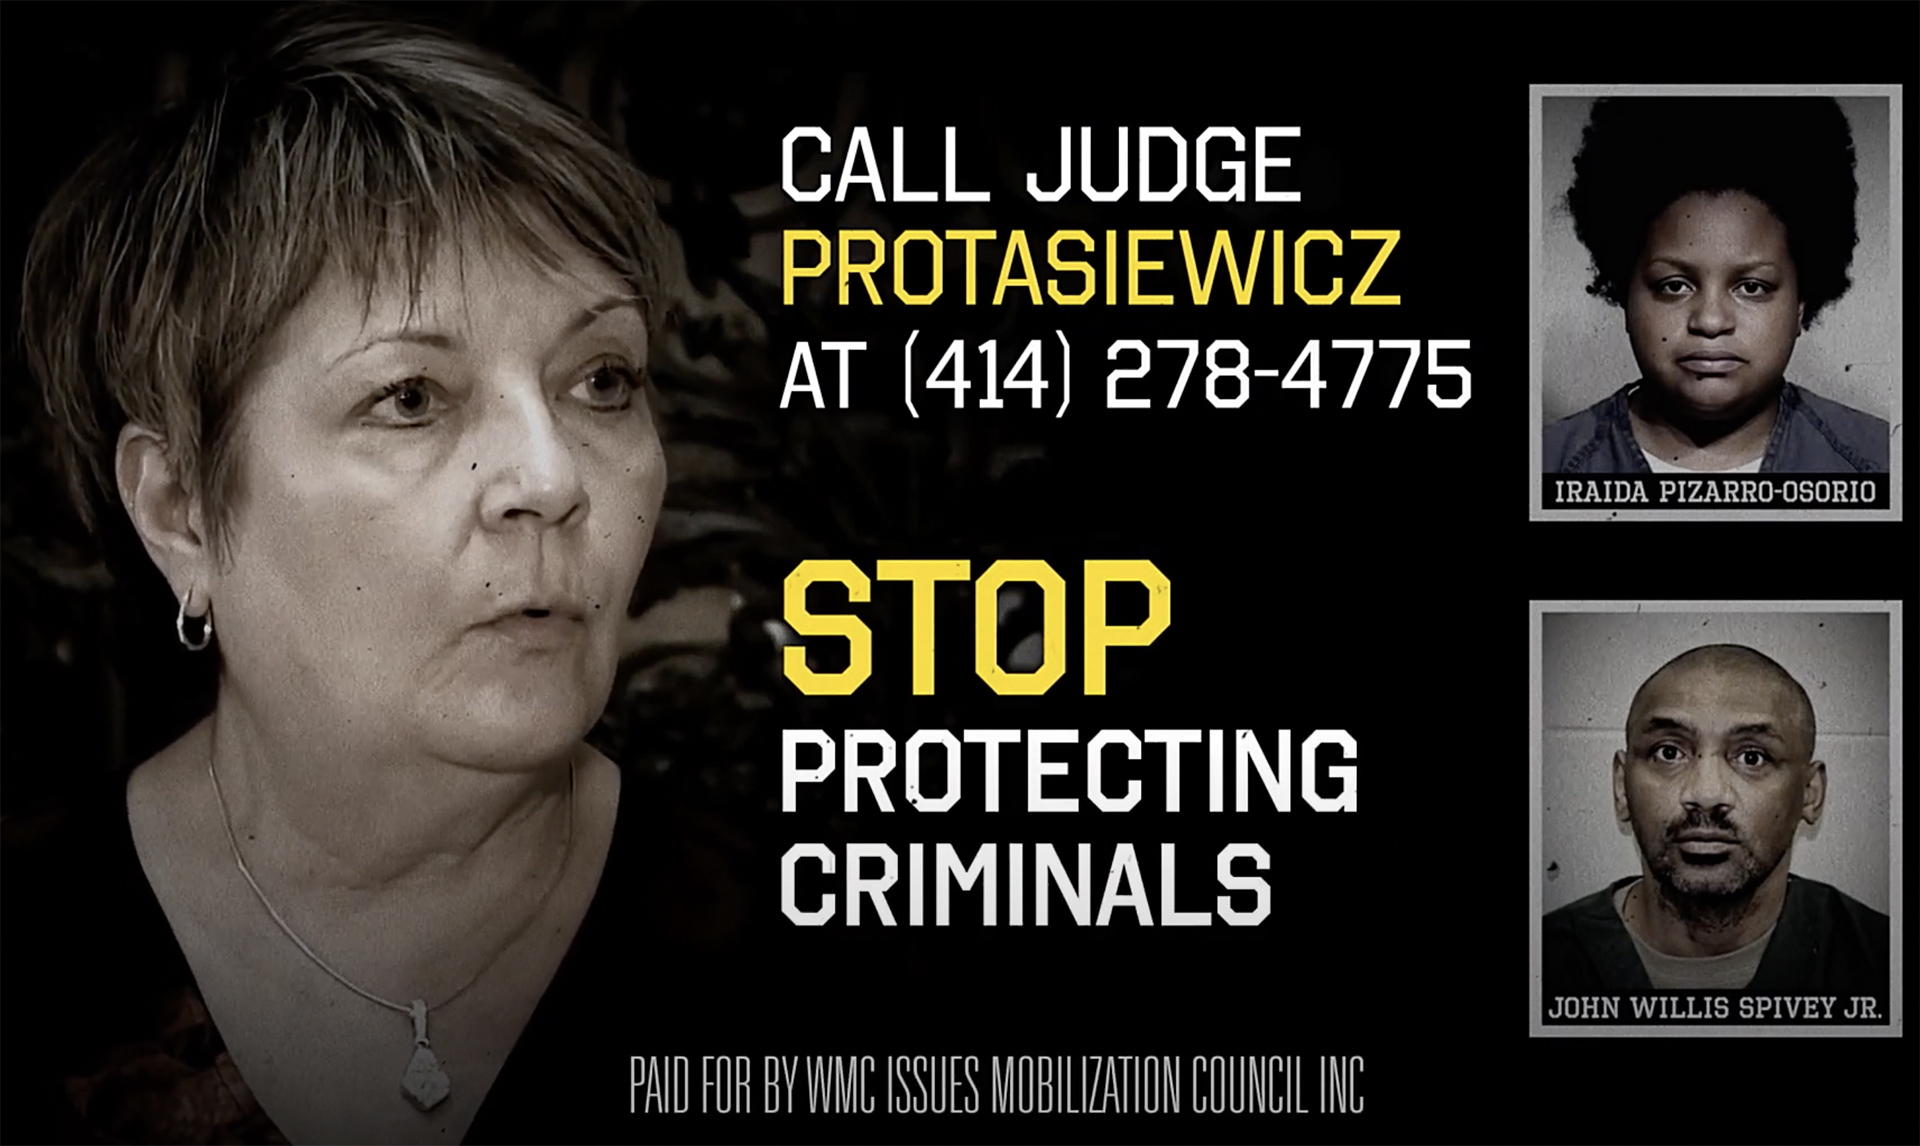 A still image from a video shows Janet Protasiewicz and two mug shots on either side of the words "Stop Protecting Criminals" with small print at the bottom identifying the source of the ad.